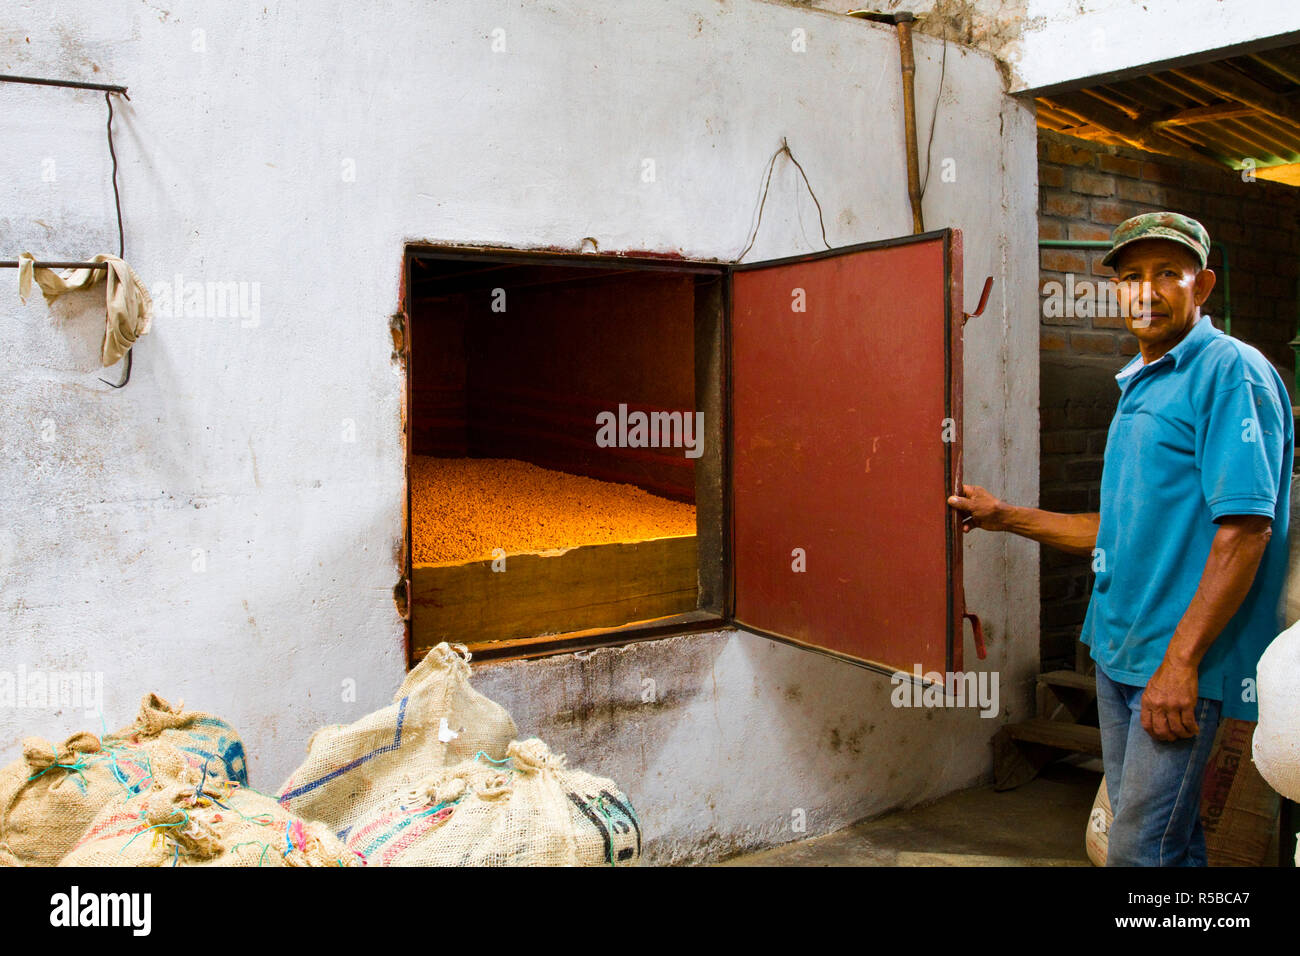 Colombia, Caldas, Manizales, Chinchina, Hacienda de Guayabal, A worker showing the oven where the coffee is dried Stock Photo